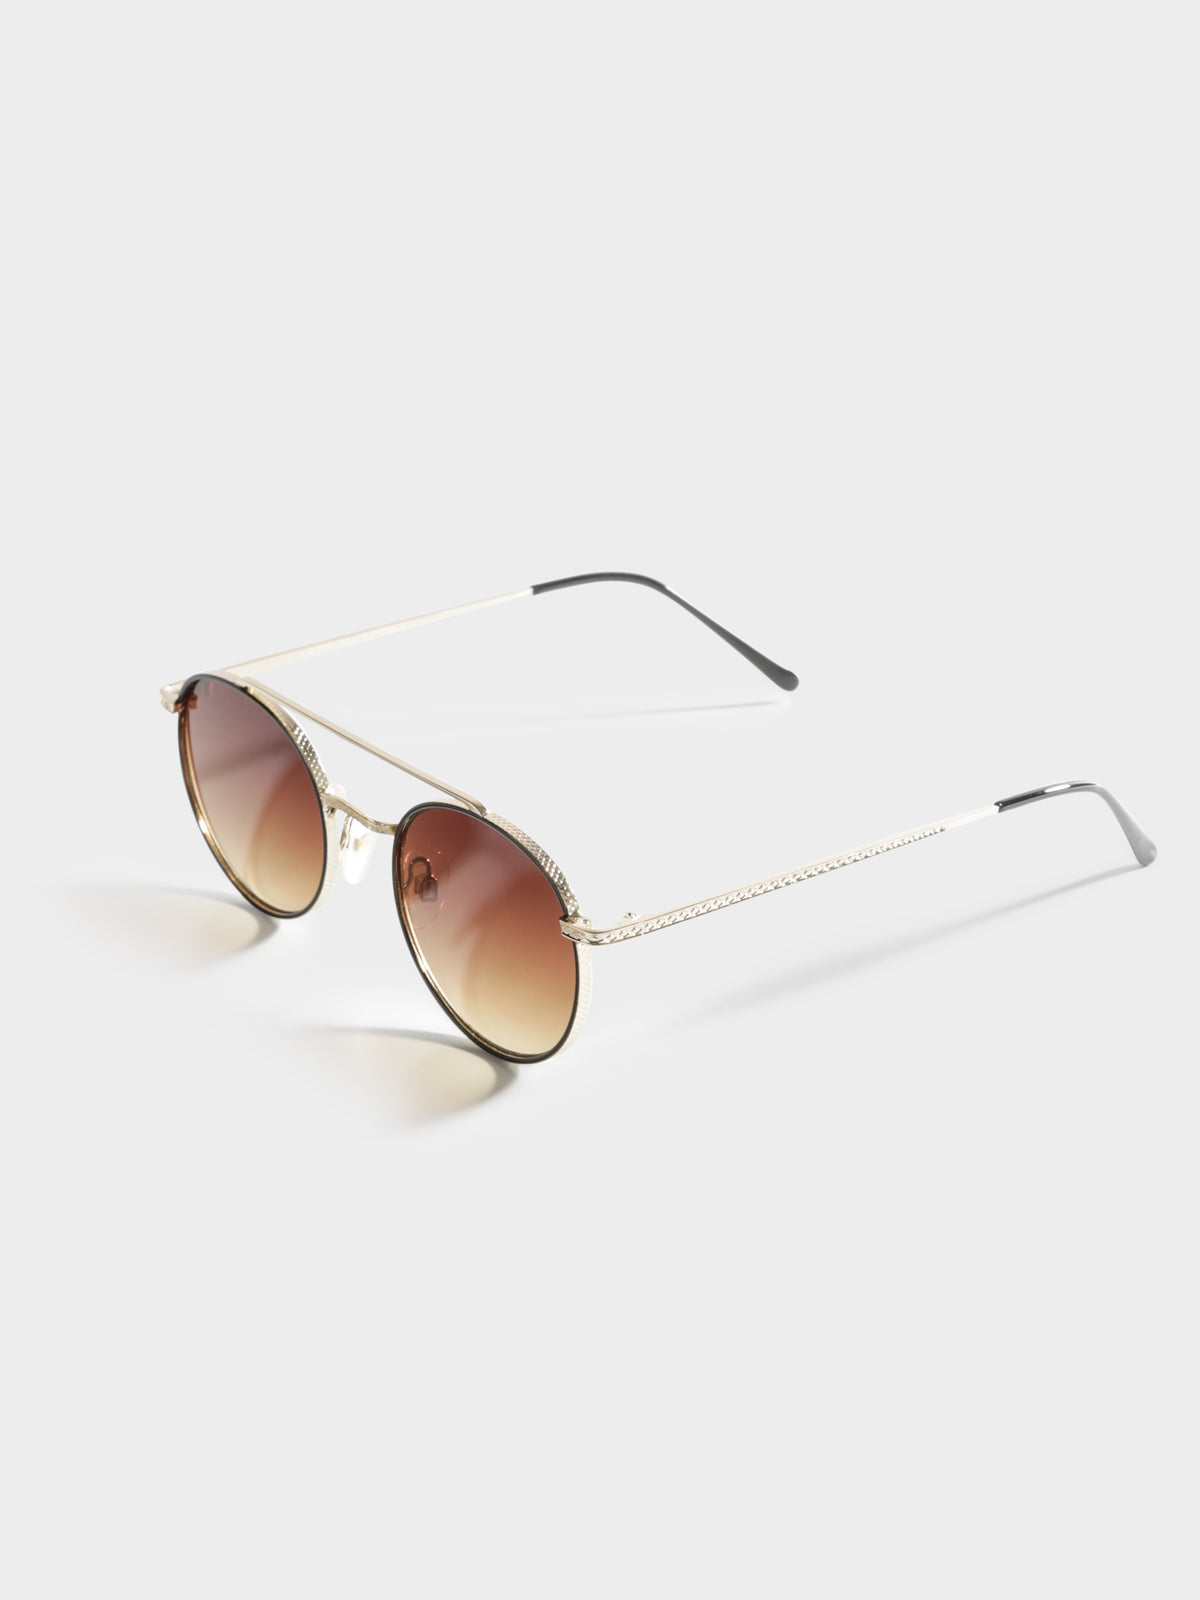 Brandon Aviator Sunglasses in Gold with Brown Lens